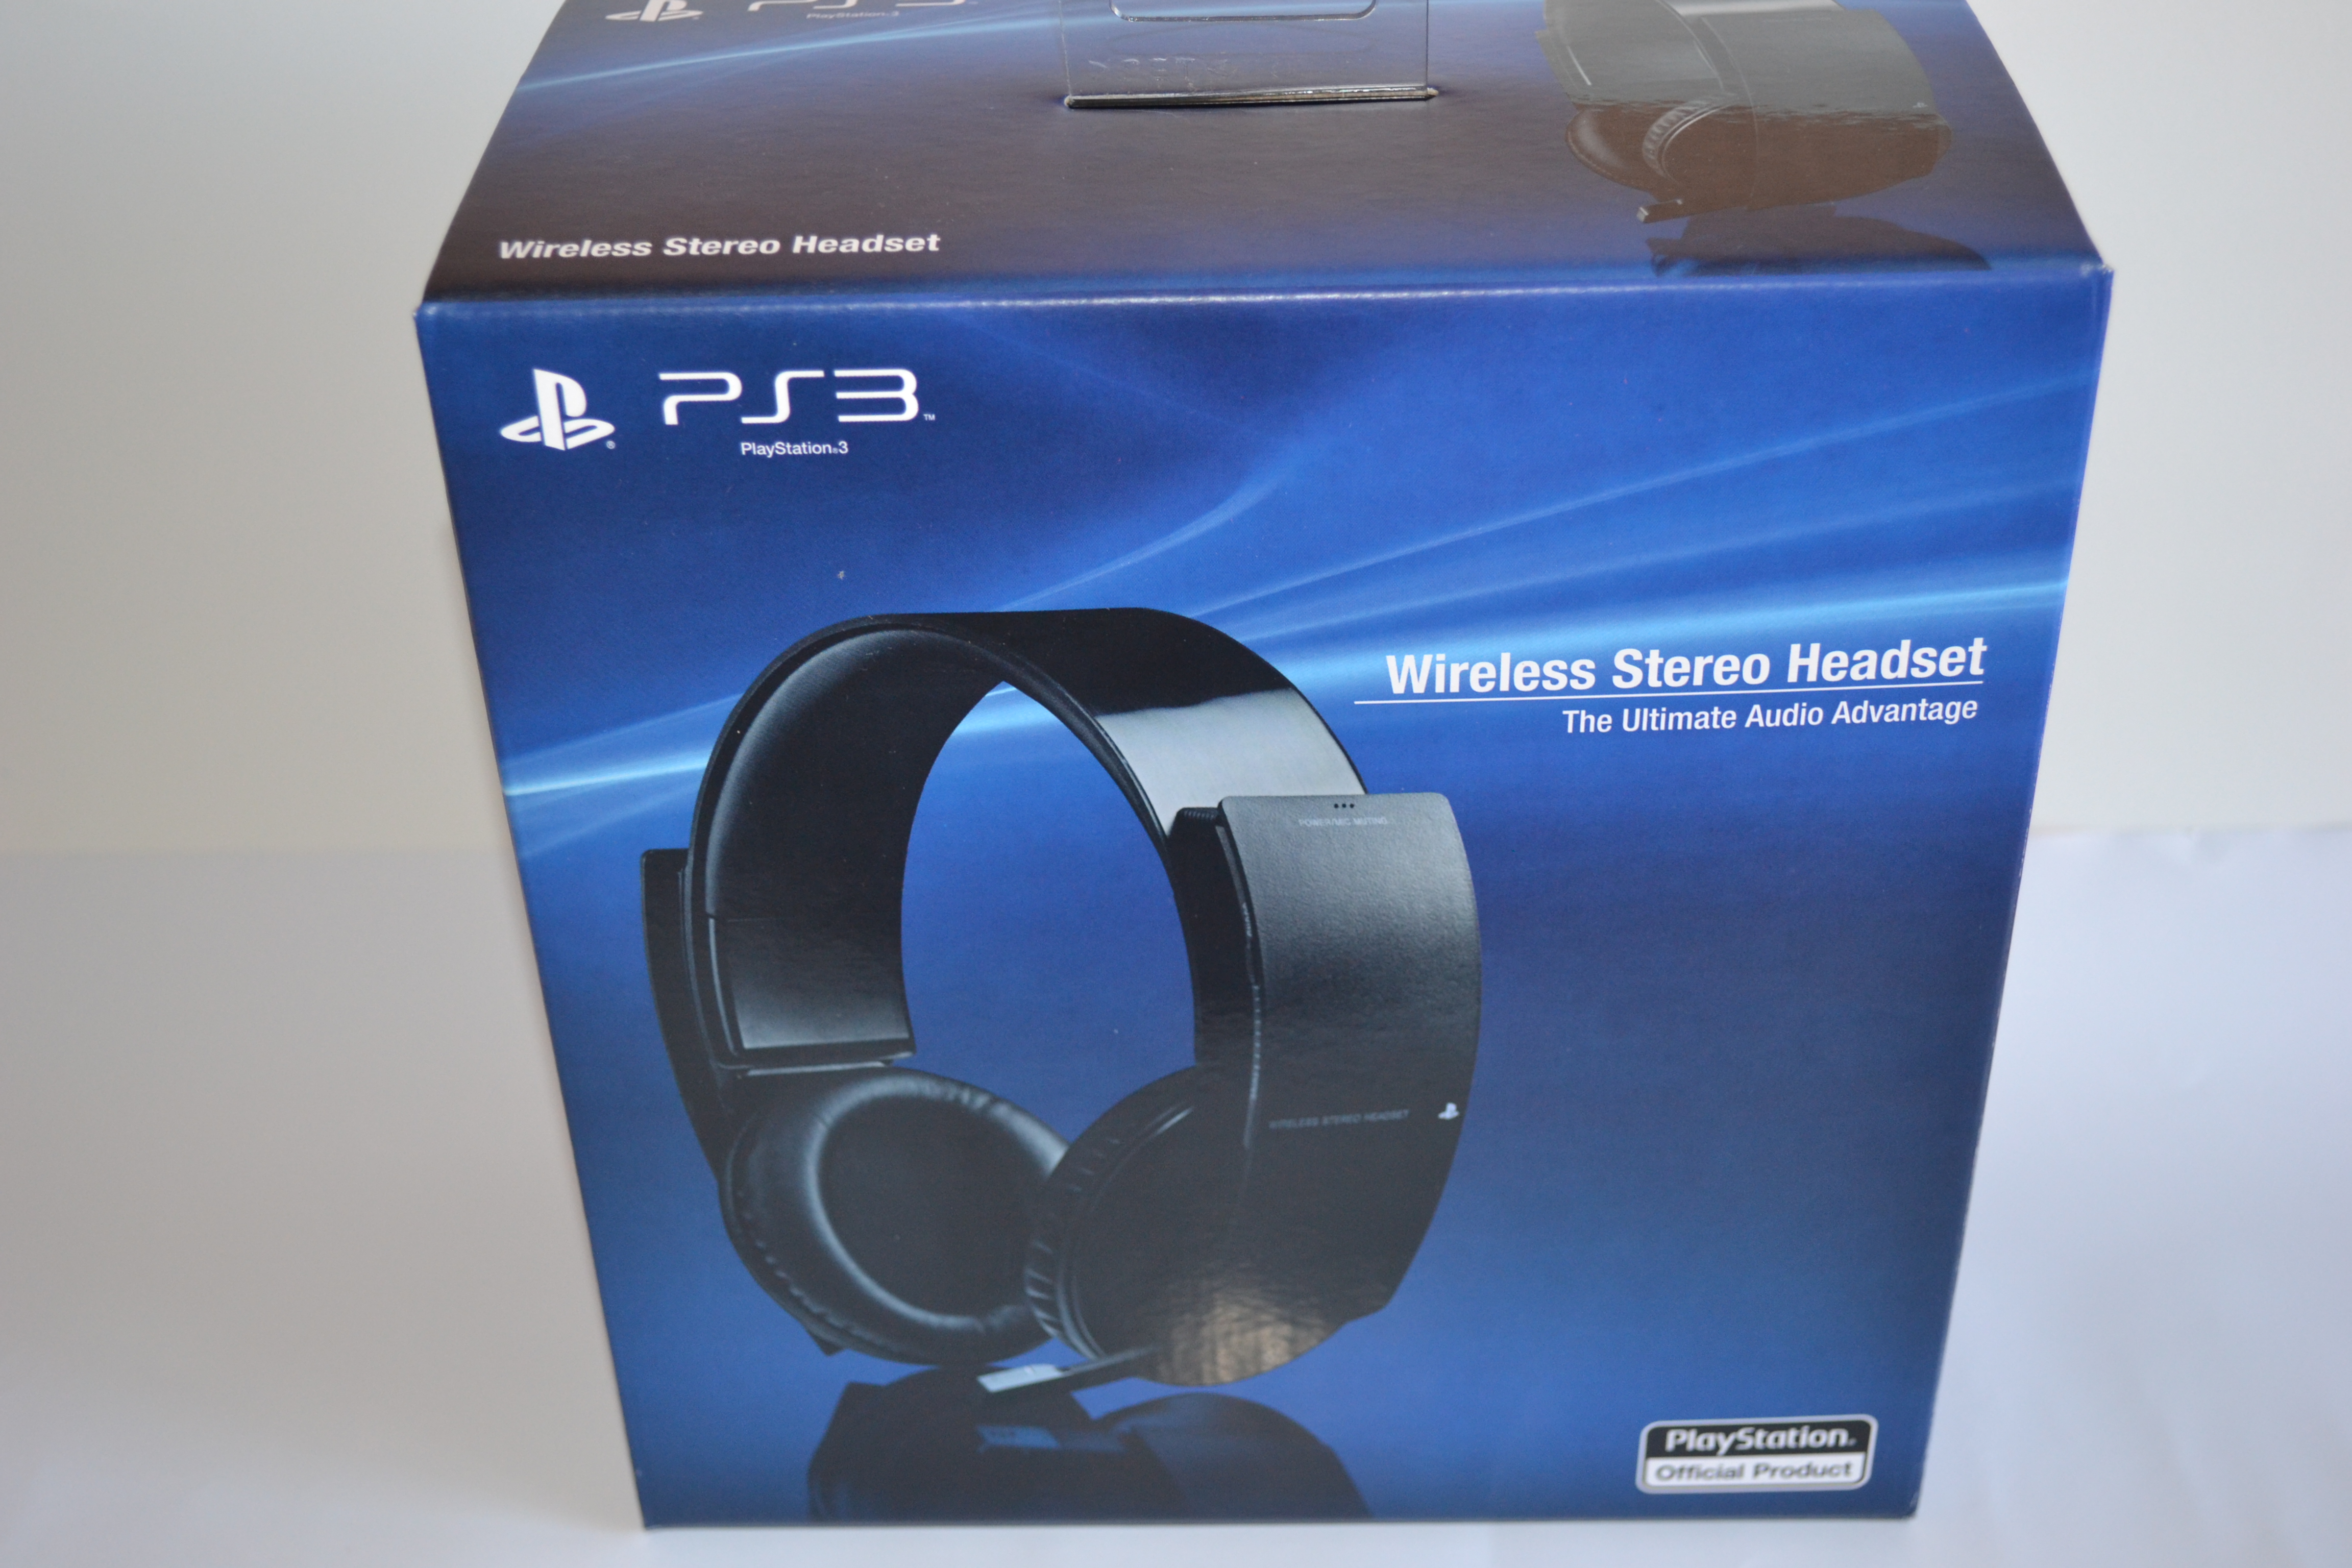 Wireless stereo headset. Ps3 Wireless stereo Headset. Sony Wireless ps3 Headset. Wireless stereo Headset ps3 батарея. Wireless Headset stereo ps3 7,1.